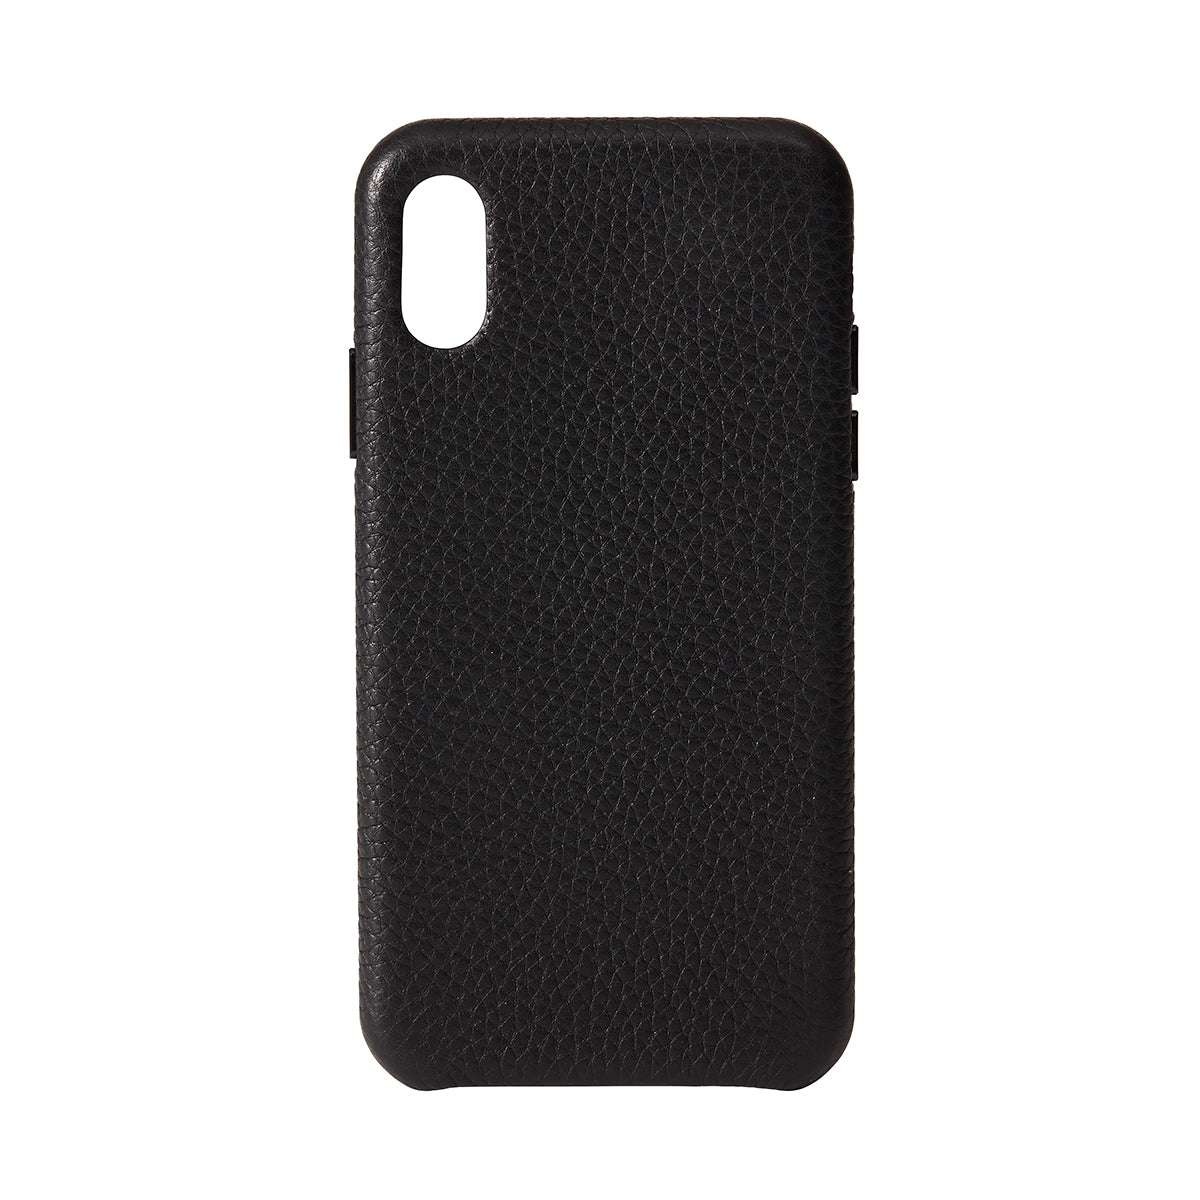 Embossed Leather iPhone X Models